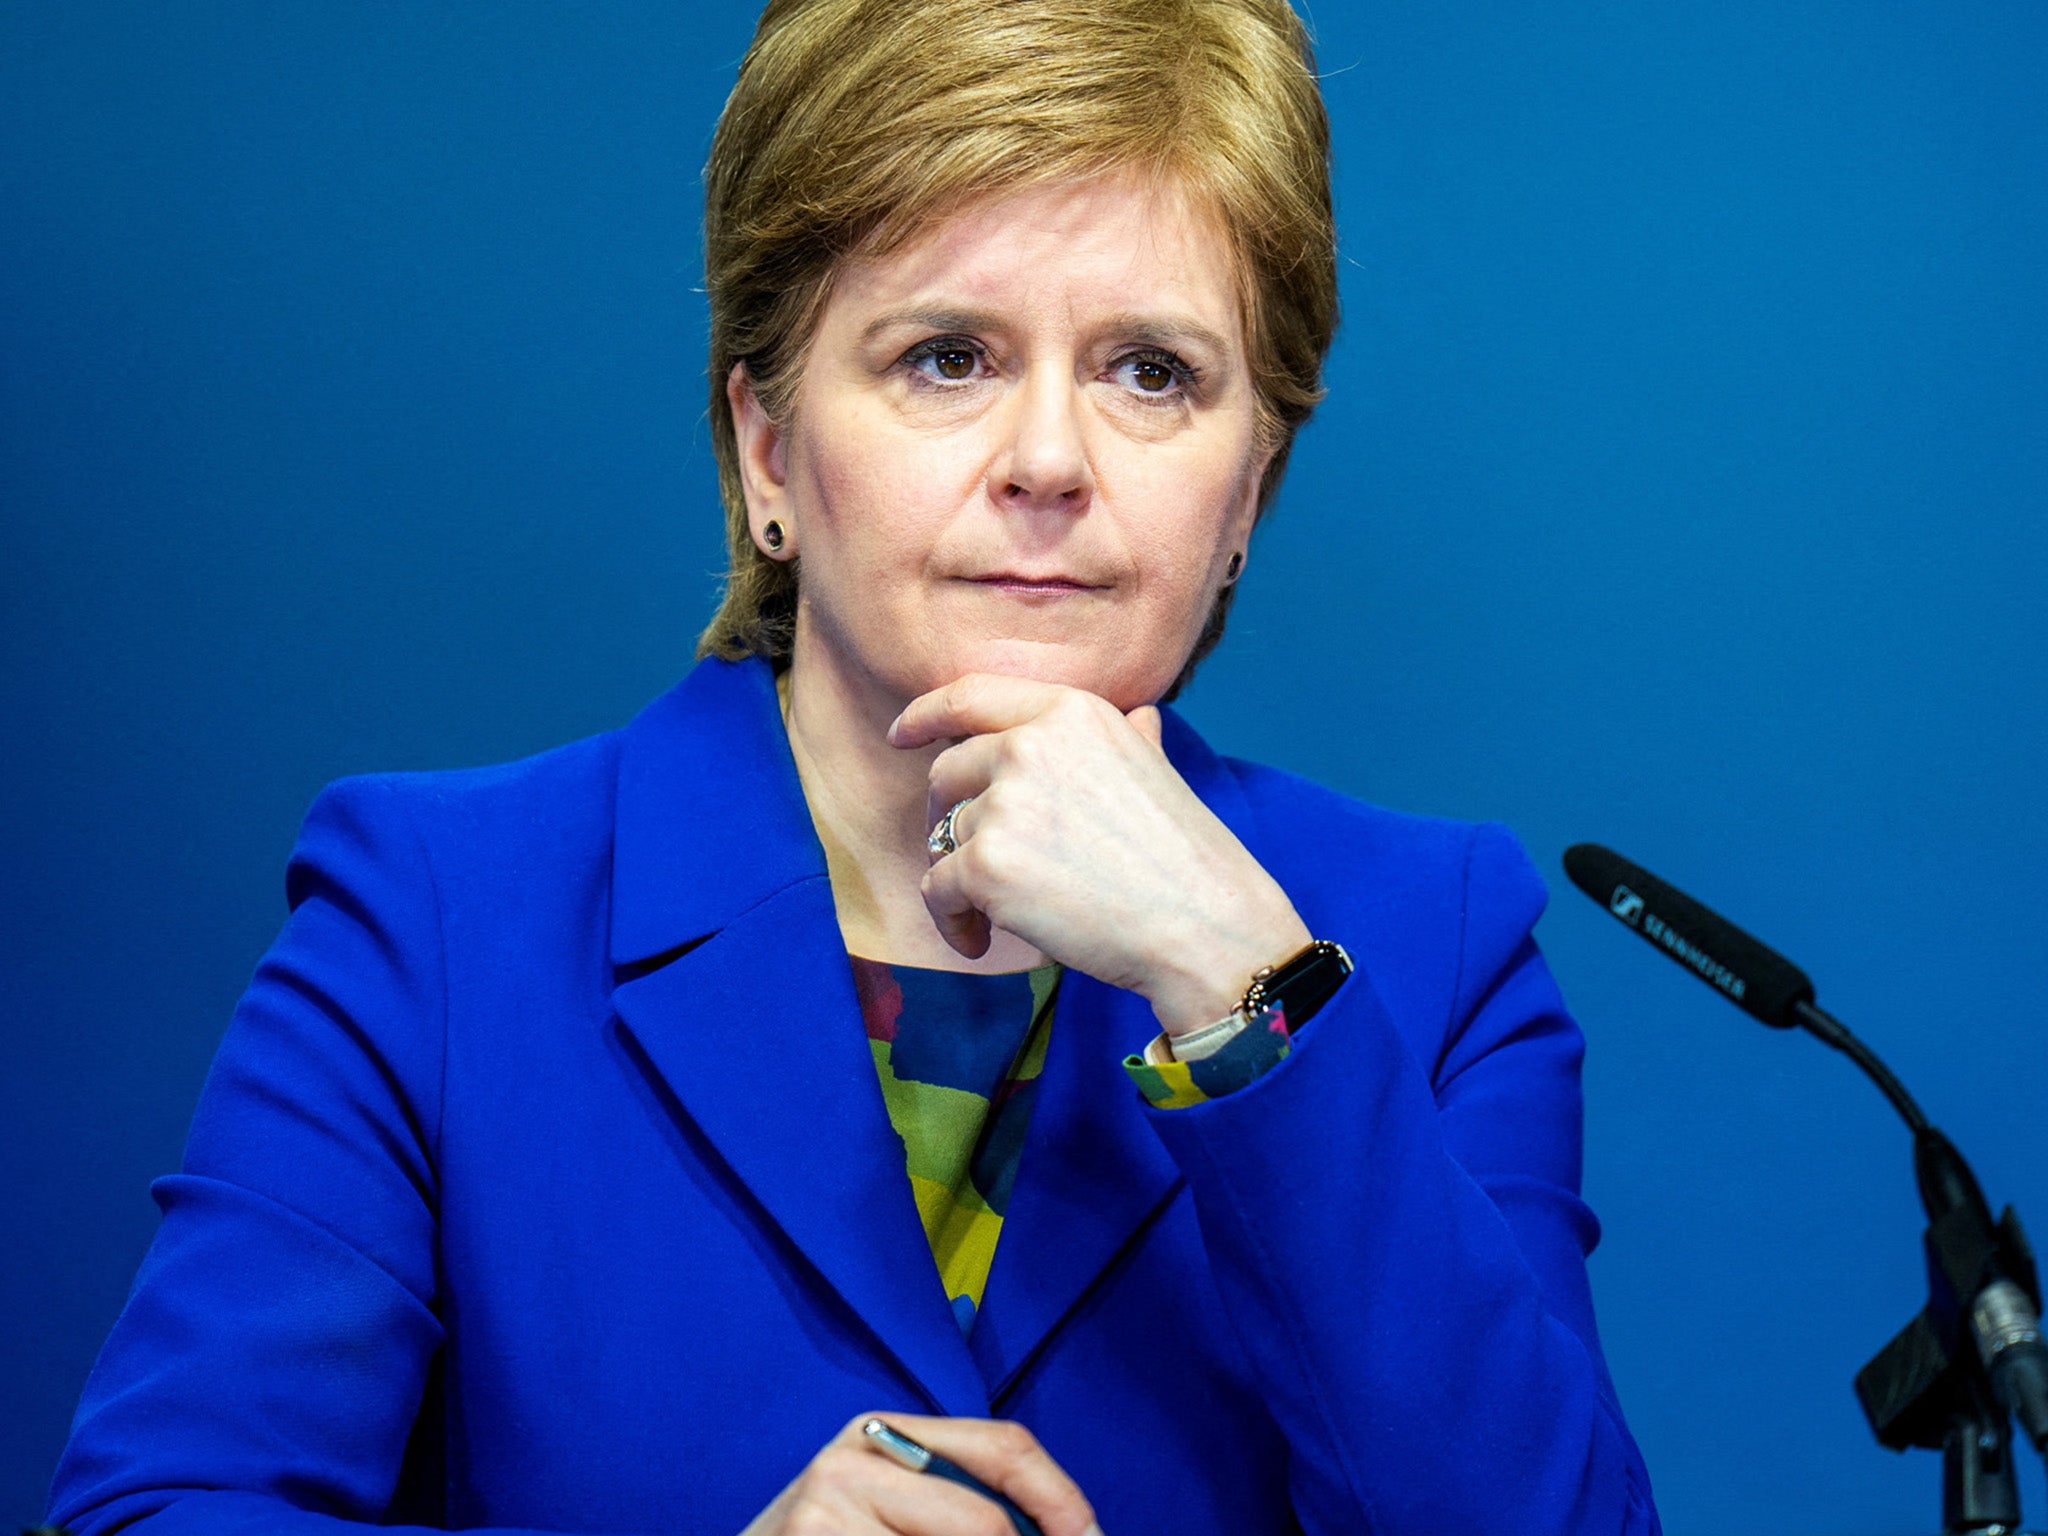 Casual observers, which frankly means most people, regarded Nicola Sturgeon as a decent and principled woman